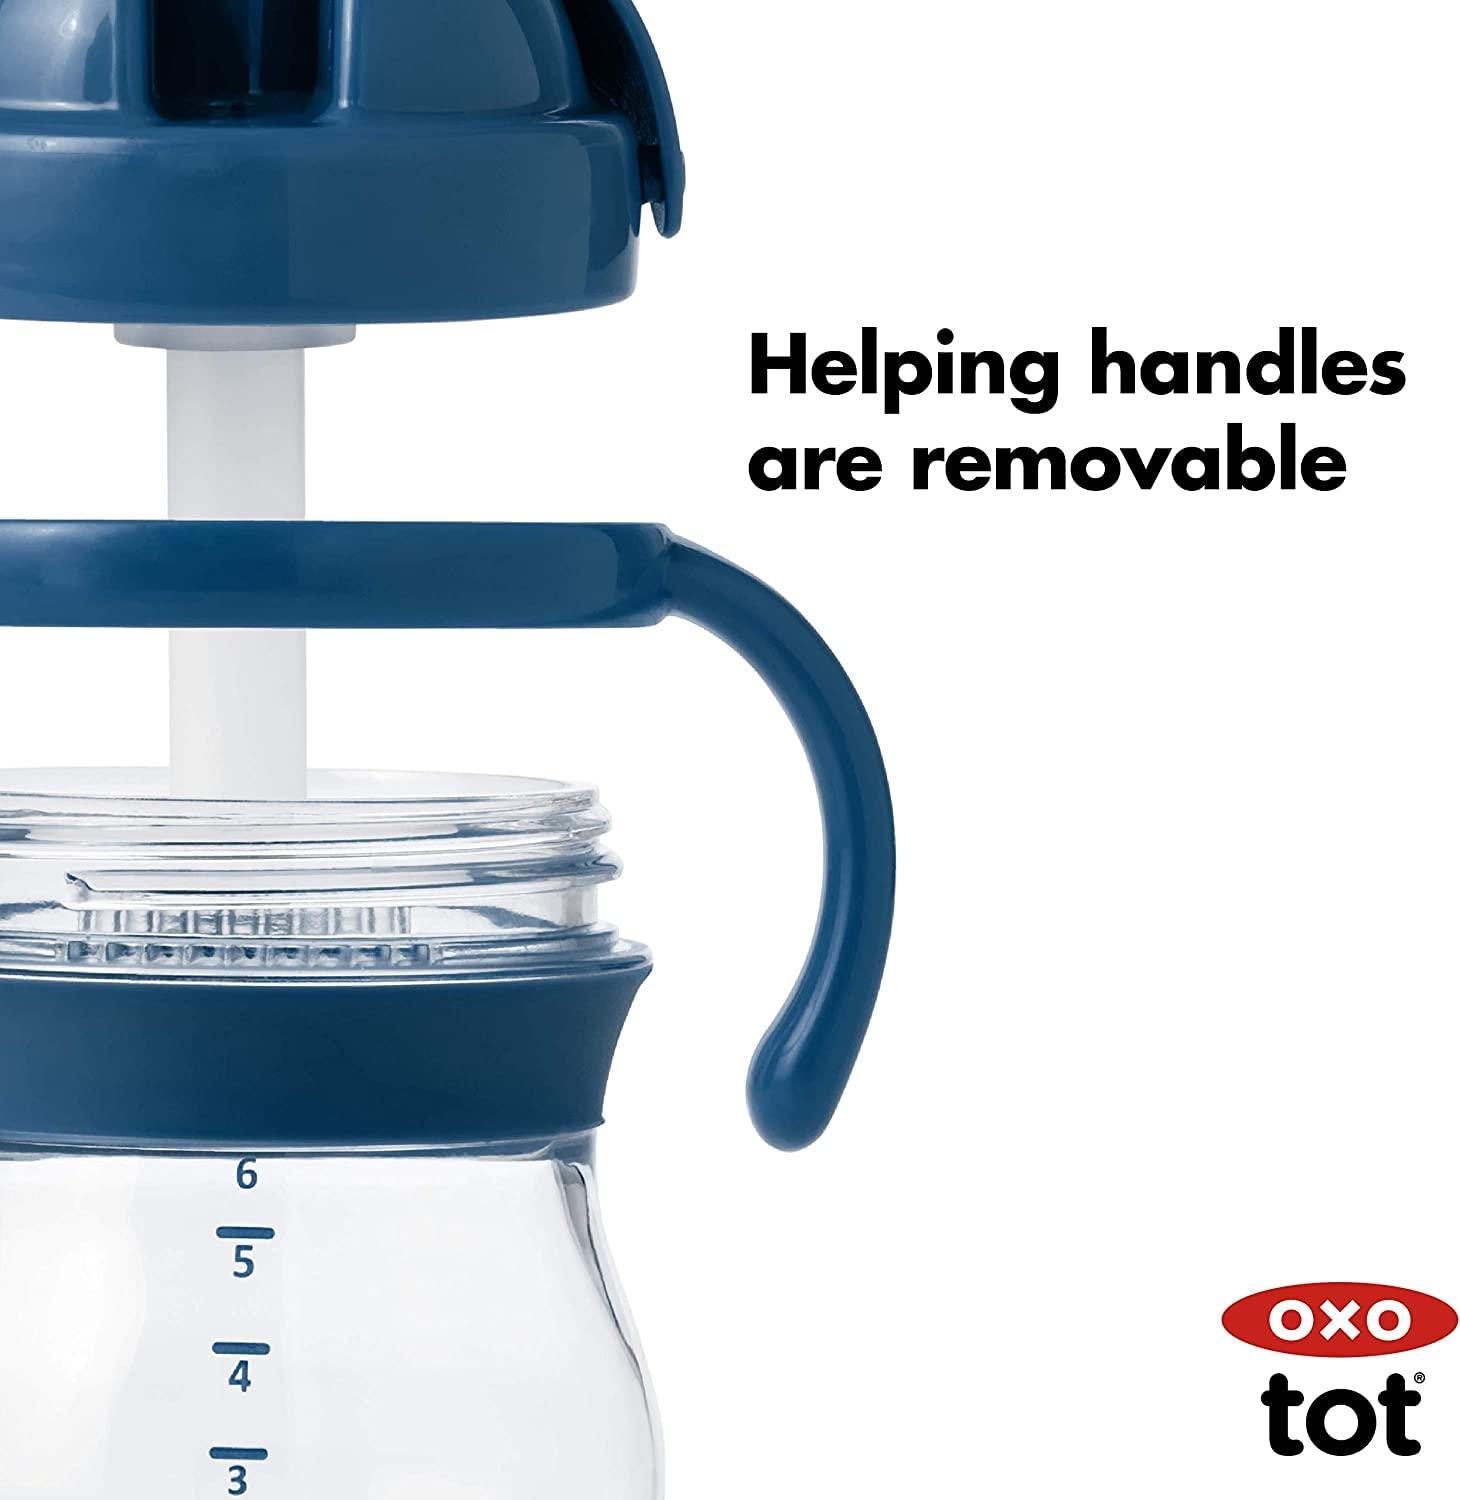  OXO Tot Transitions Straw Cup With Removable Handles - 6oz -  Navy : Baby